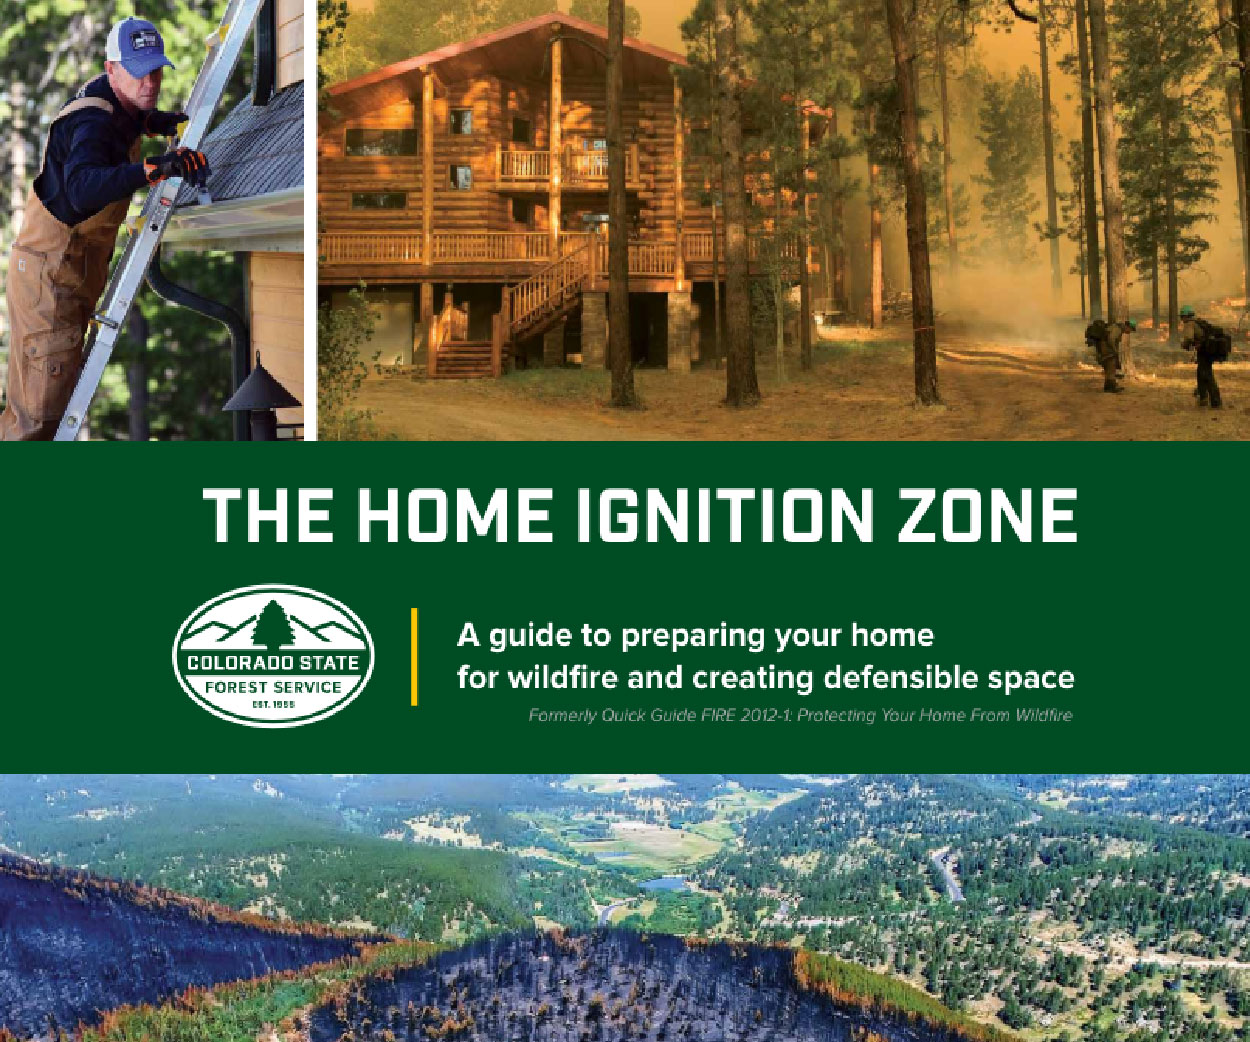 Home Ignition Zone Guide link